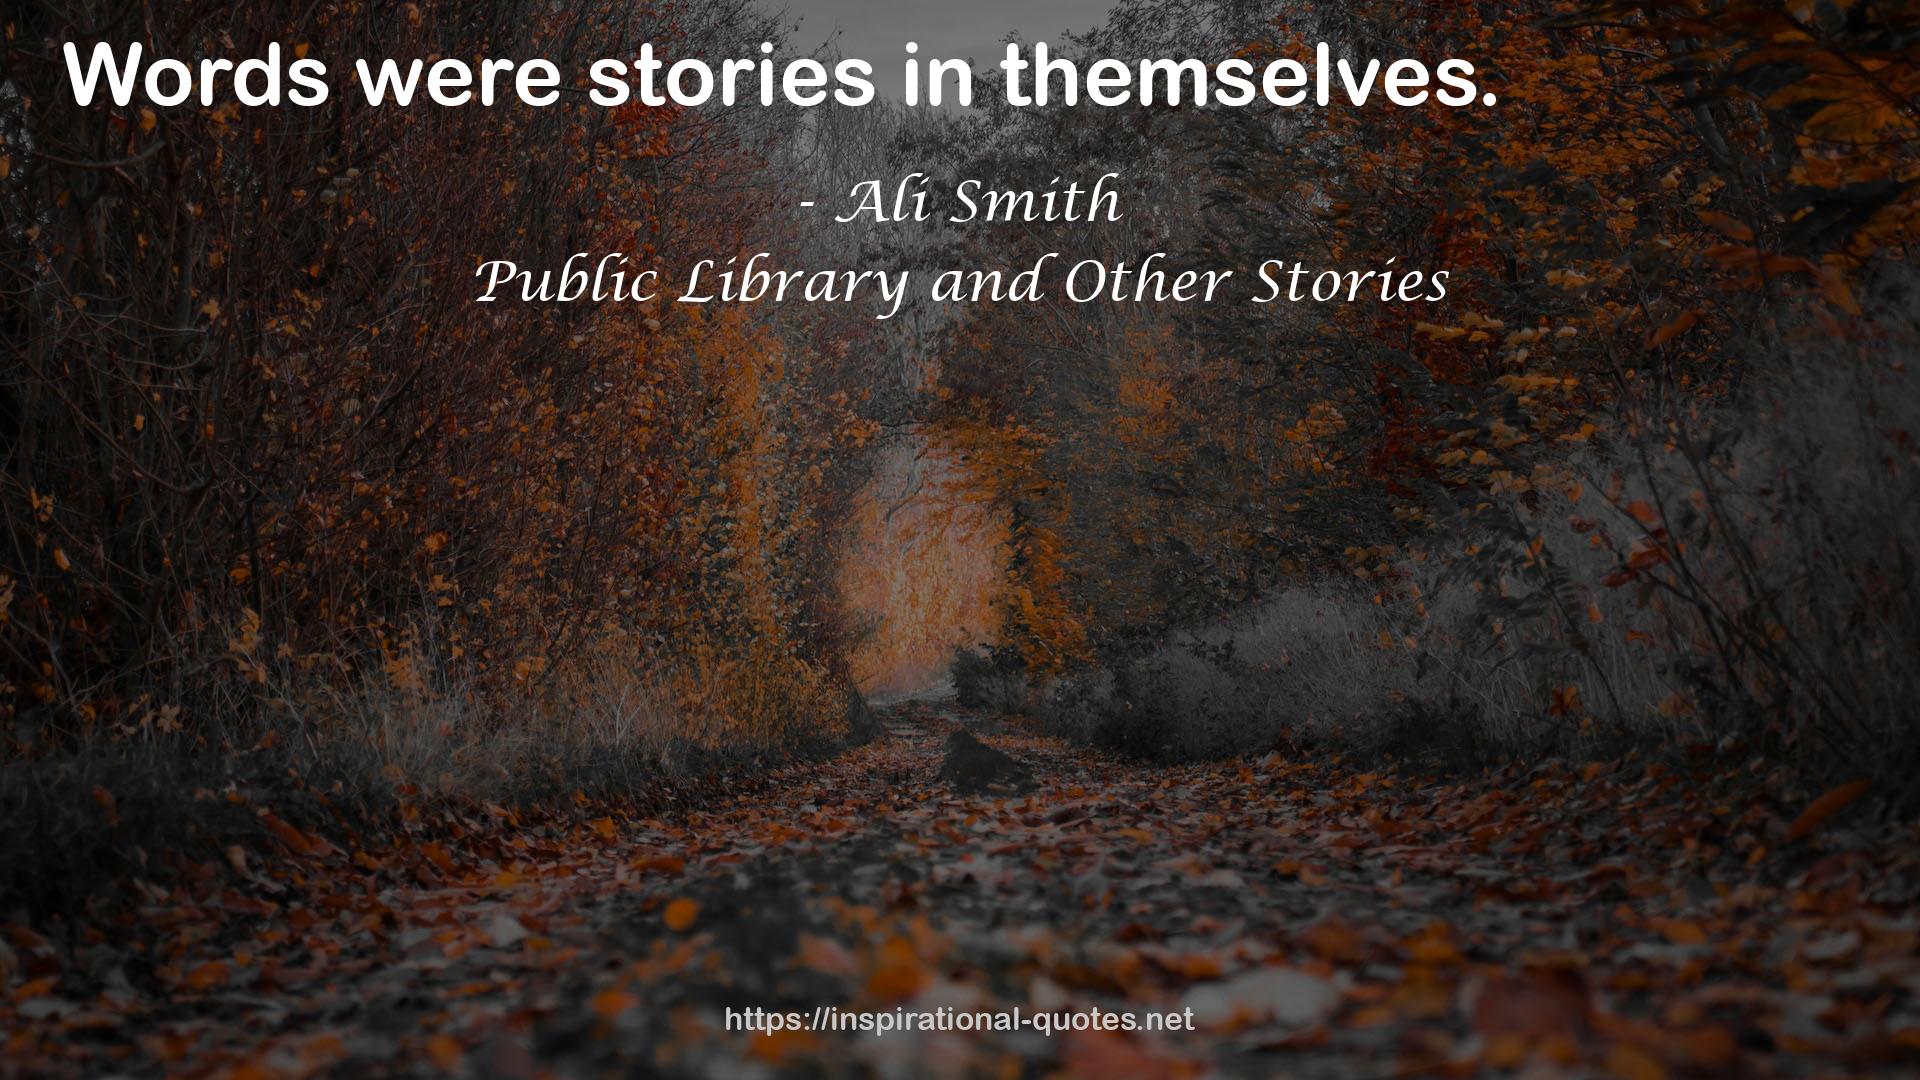 Public Library and Other Stories QUOTES